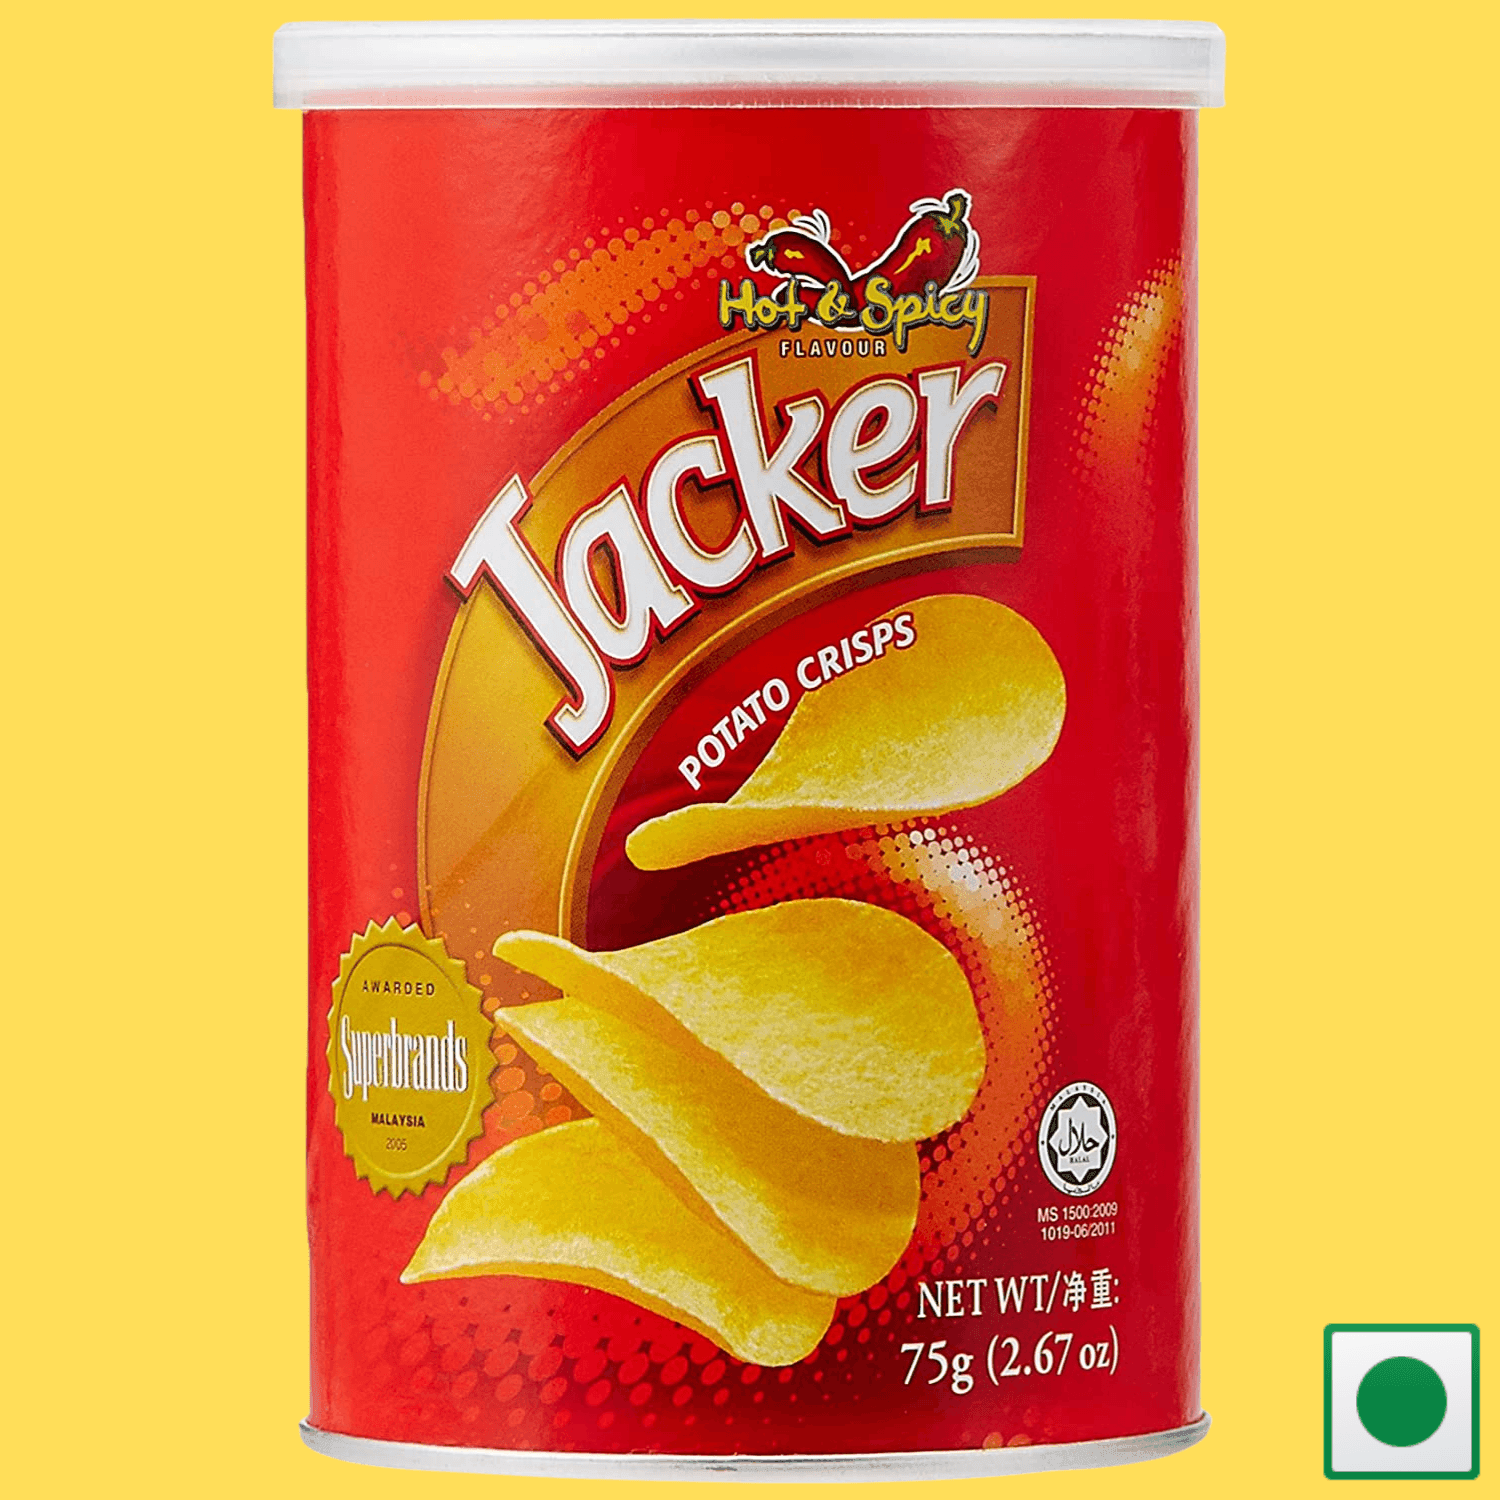 Jacker Hot and Spicy, 75g (Imported) - Super 7 Mart